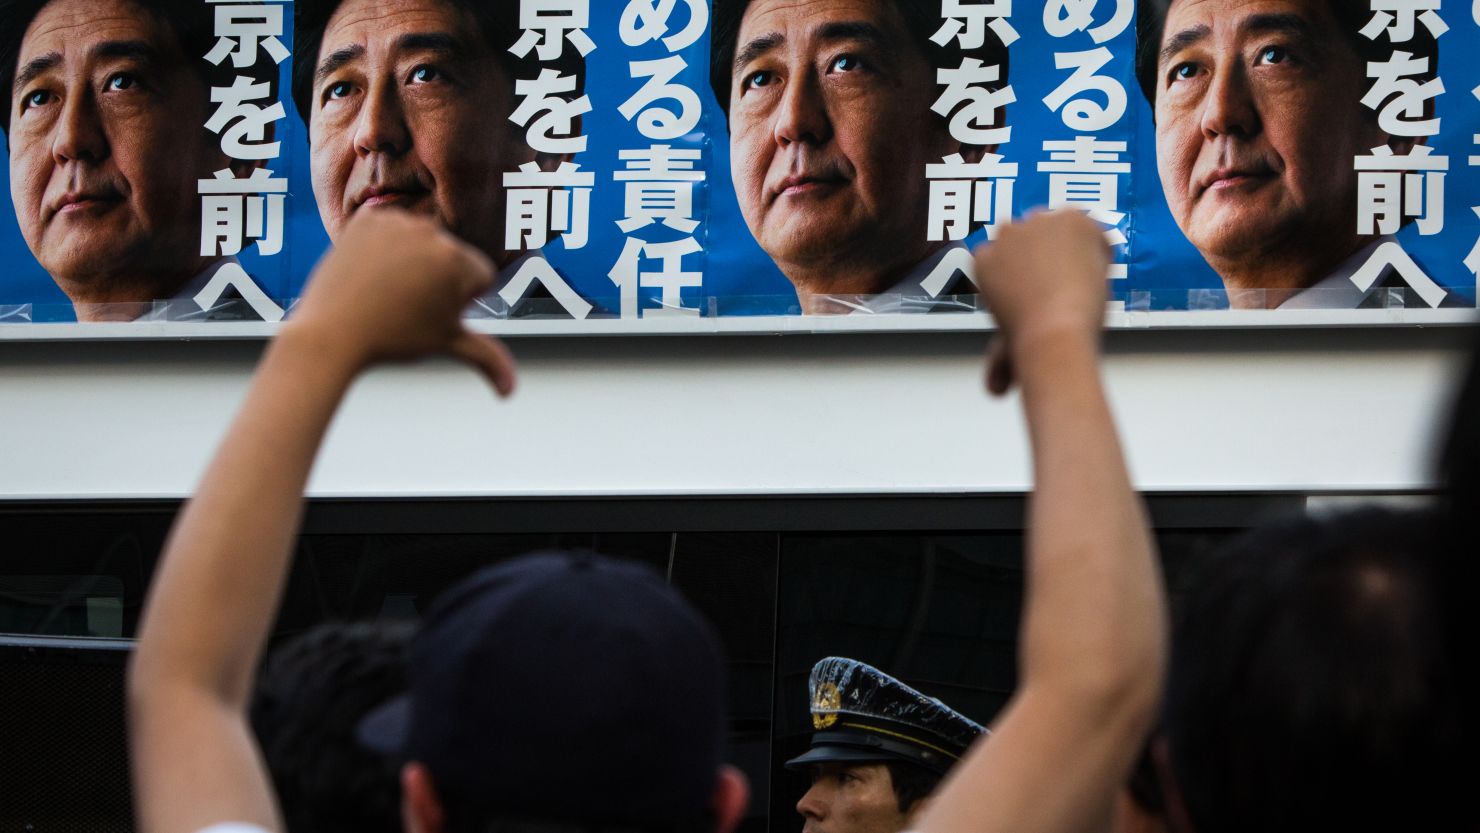 Voters react to Japanese Prime Minister Shinzo Abe's campaign posters during the Tokyo Metropolitan Assembly election.